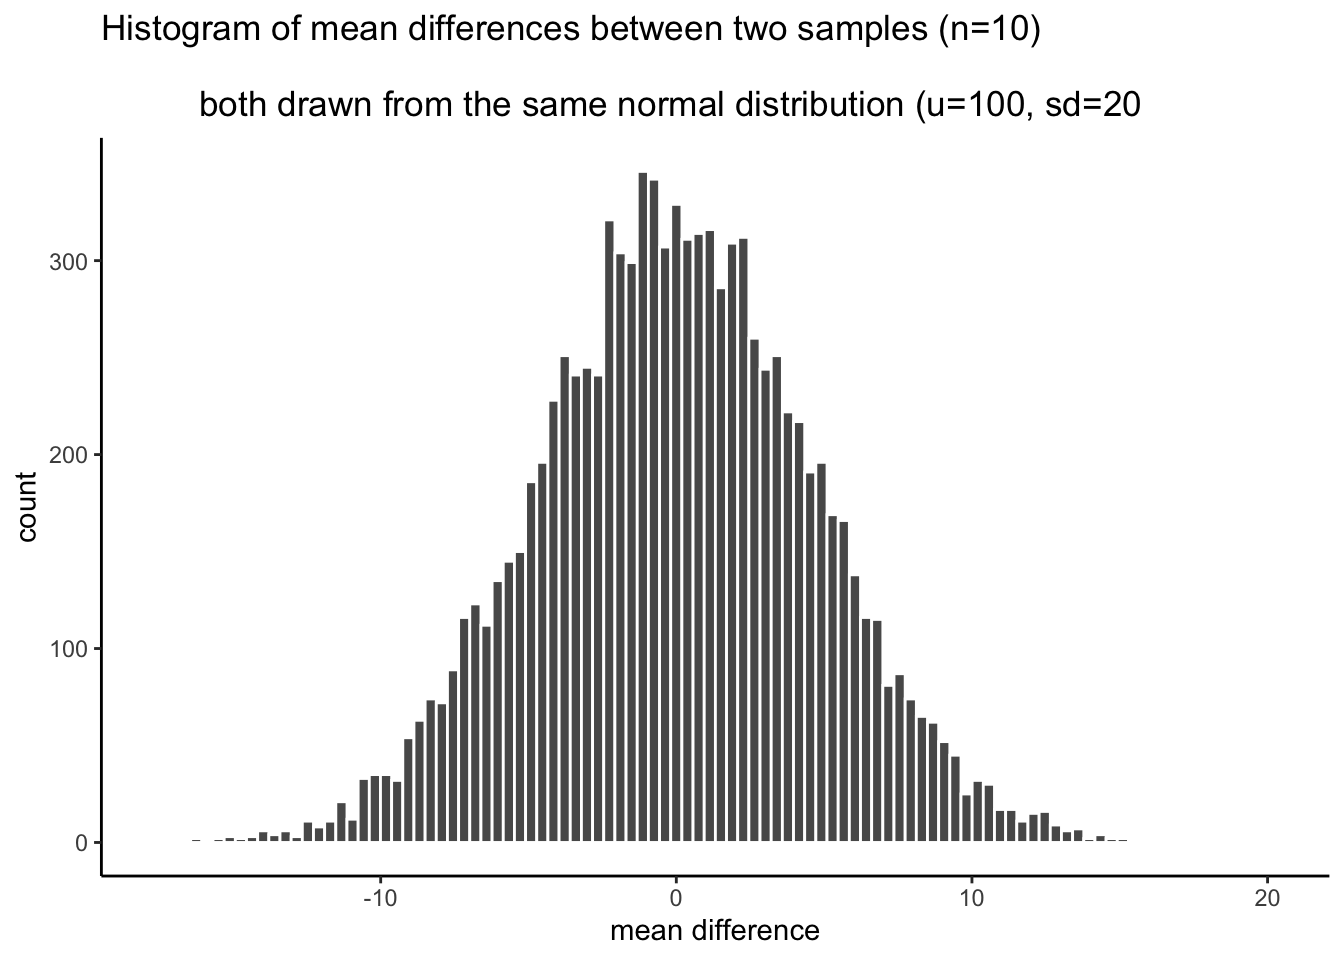 Histogram of mean differences arising by chance